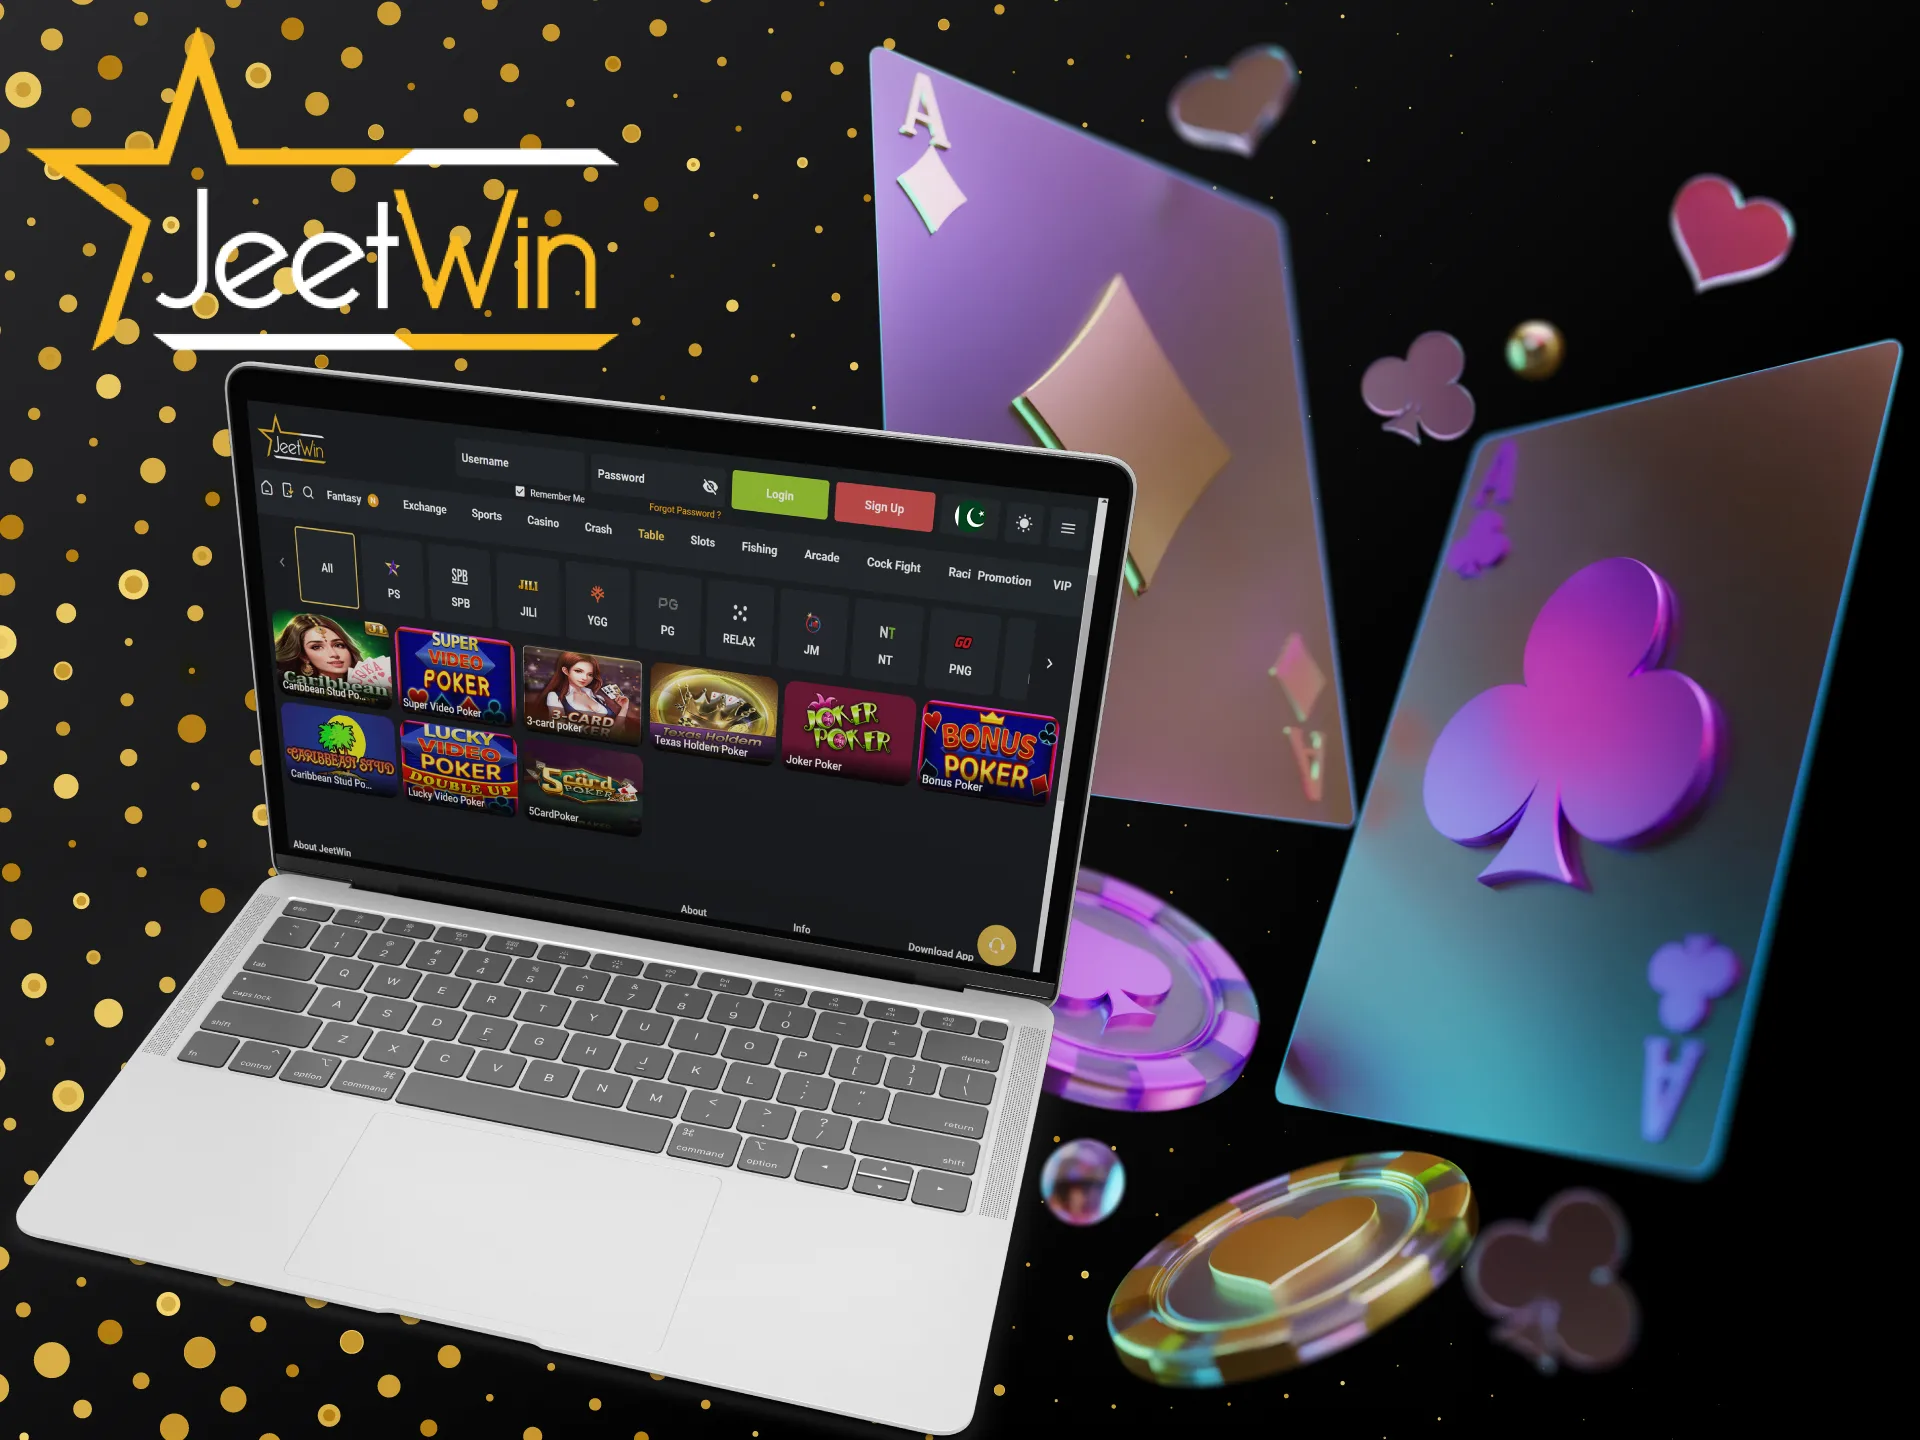 Learn the rules of poker and start winning with JeetWin.